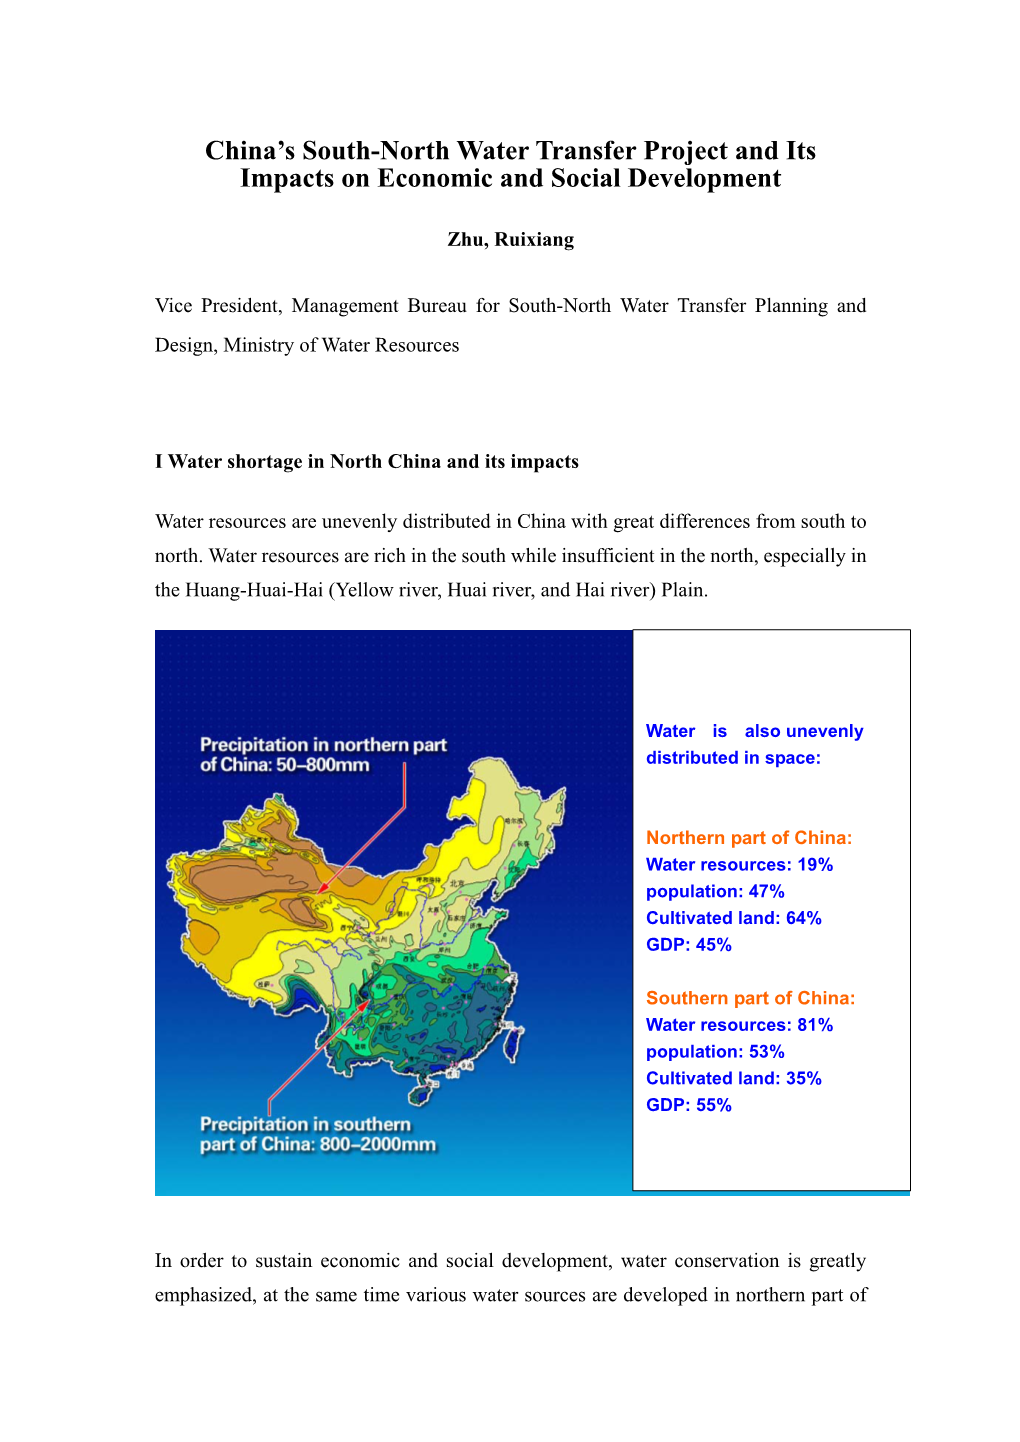 China's South-North Water Transfer Project and Its Impacts on Economic and Social Development